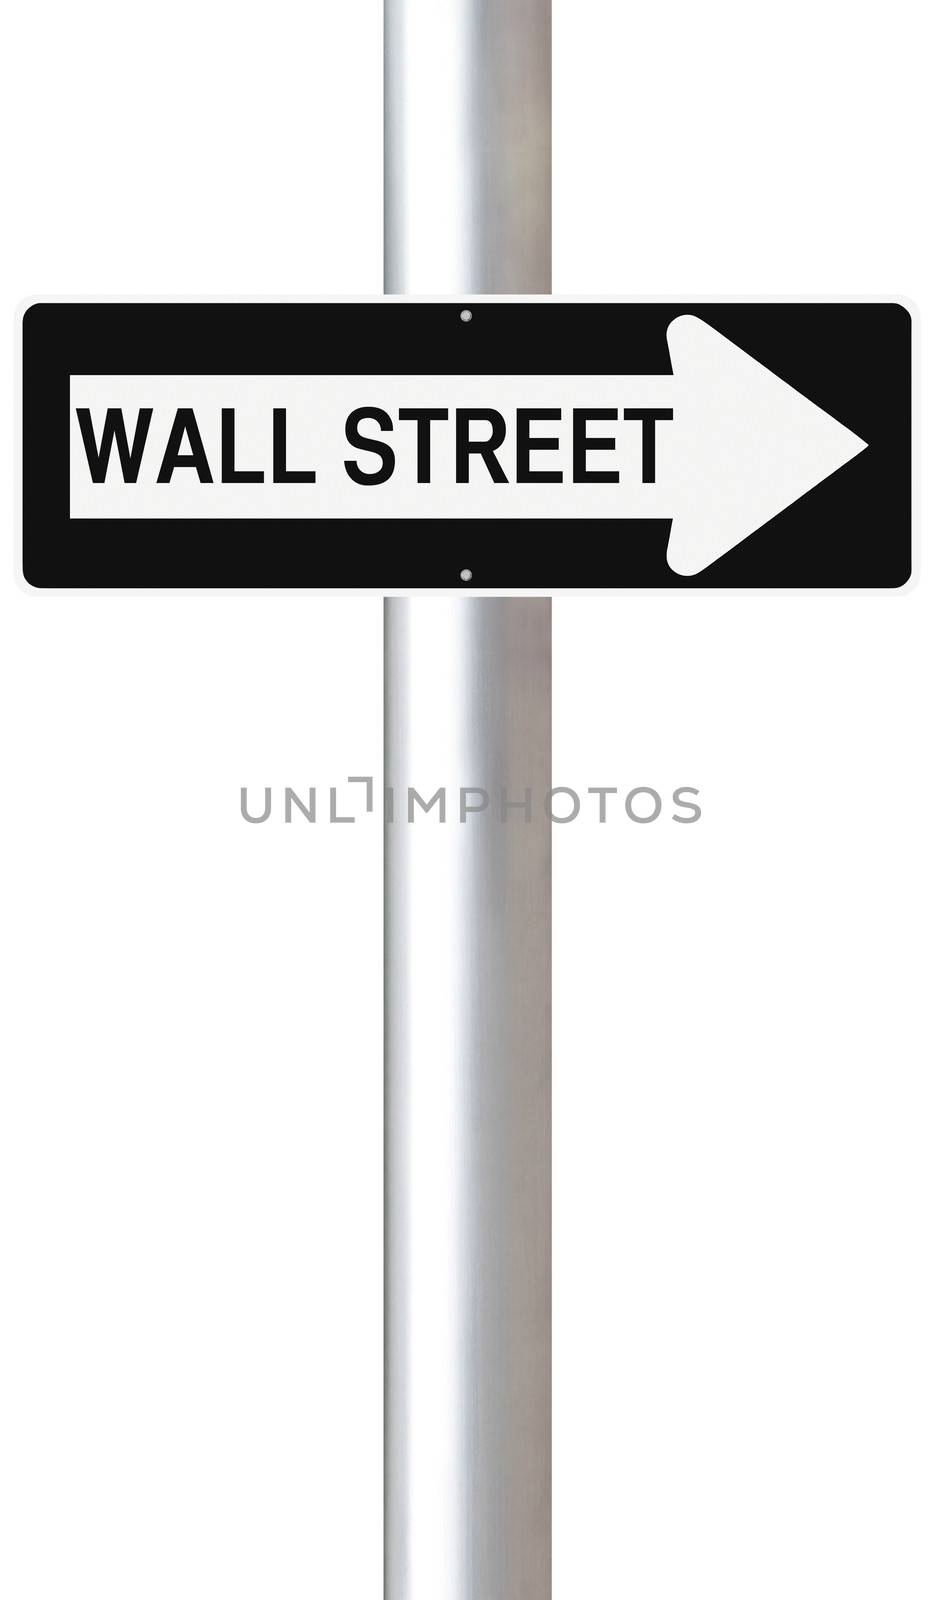 This Way to Wall Street by rnl